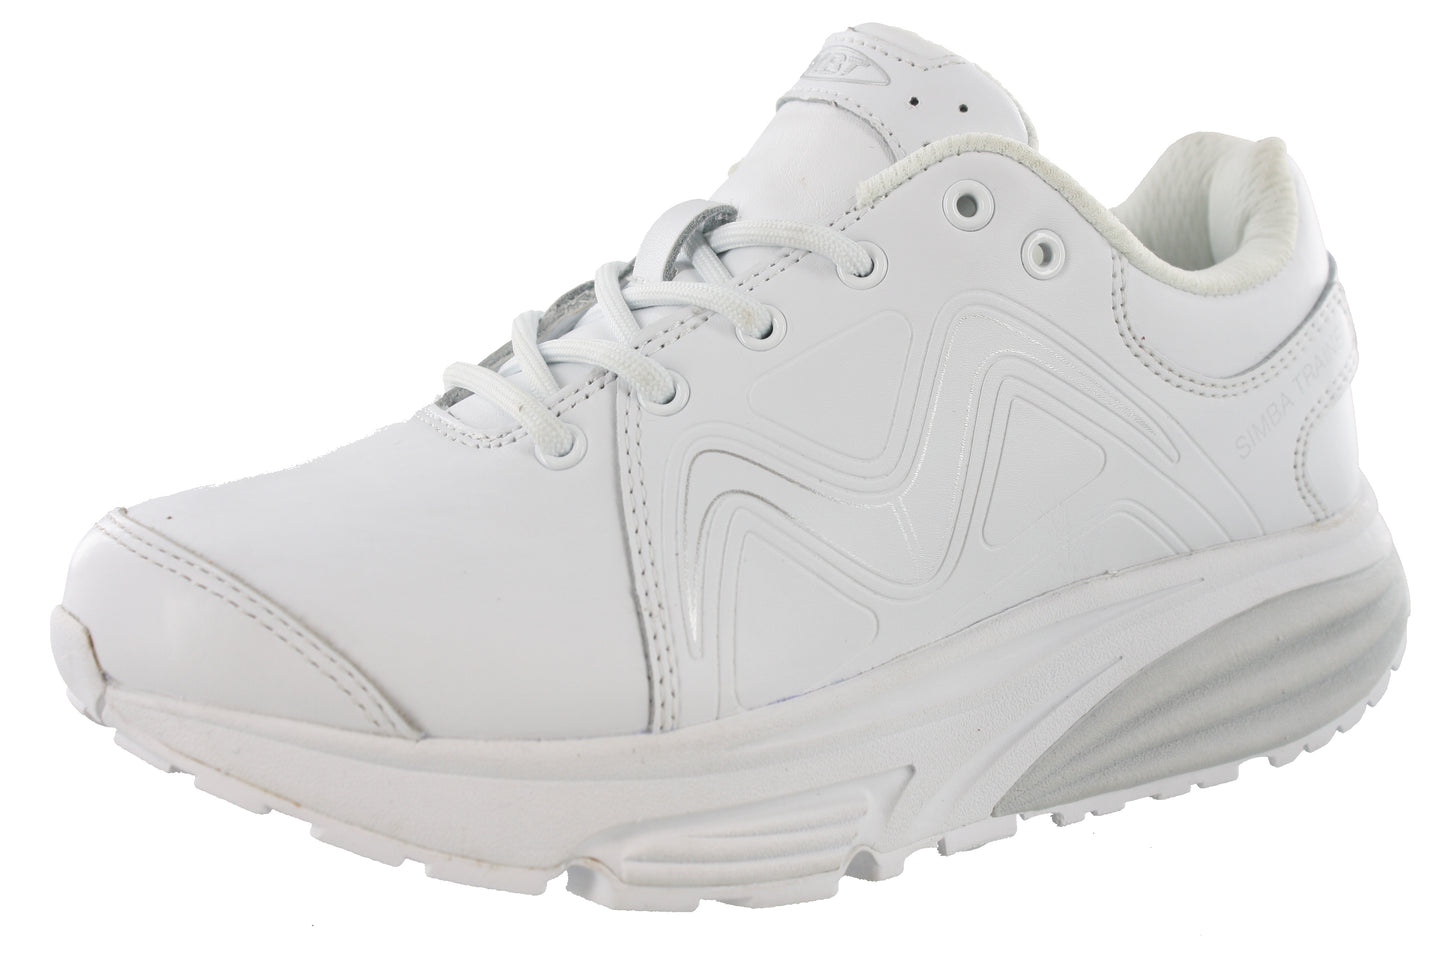 sådan Mindful Lang MBT APMA Approved Walking and Running Sneakers Online | Shoe City